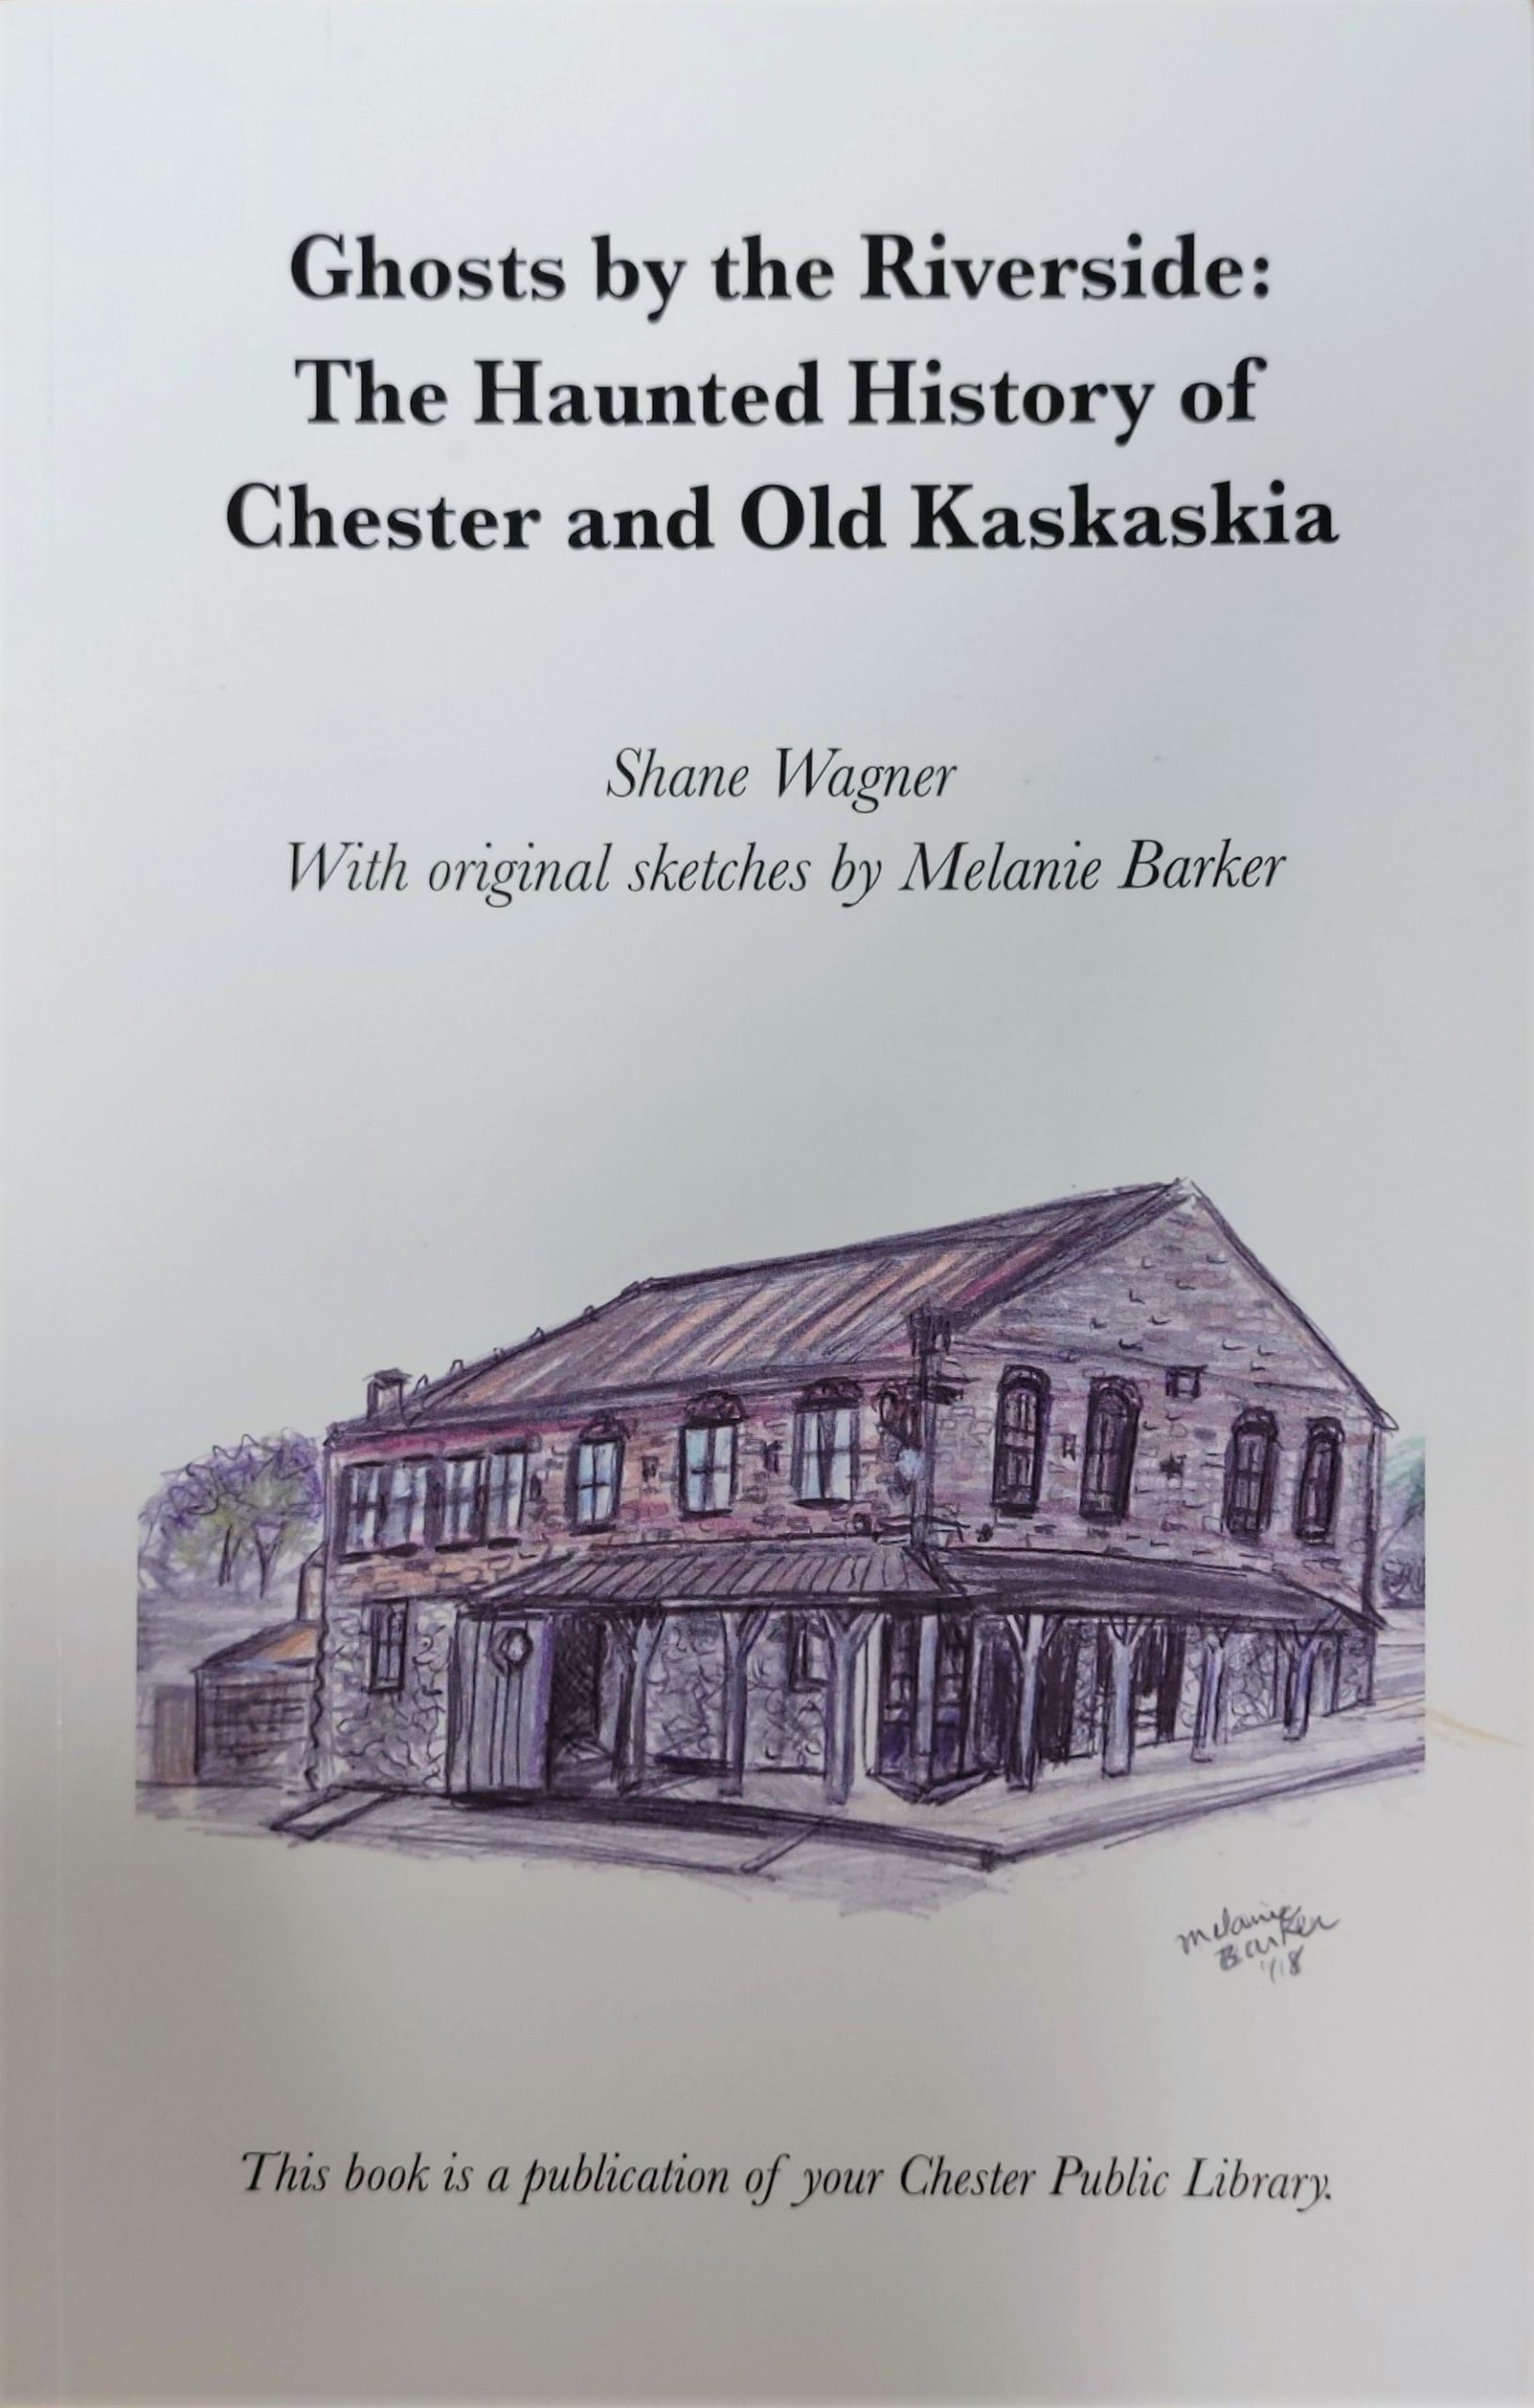 Photograph of cover of Ghosts by the Riverside by Shane Wagner.